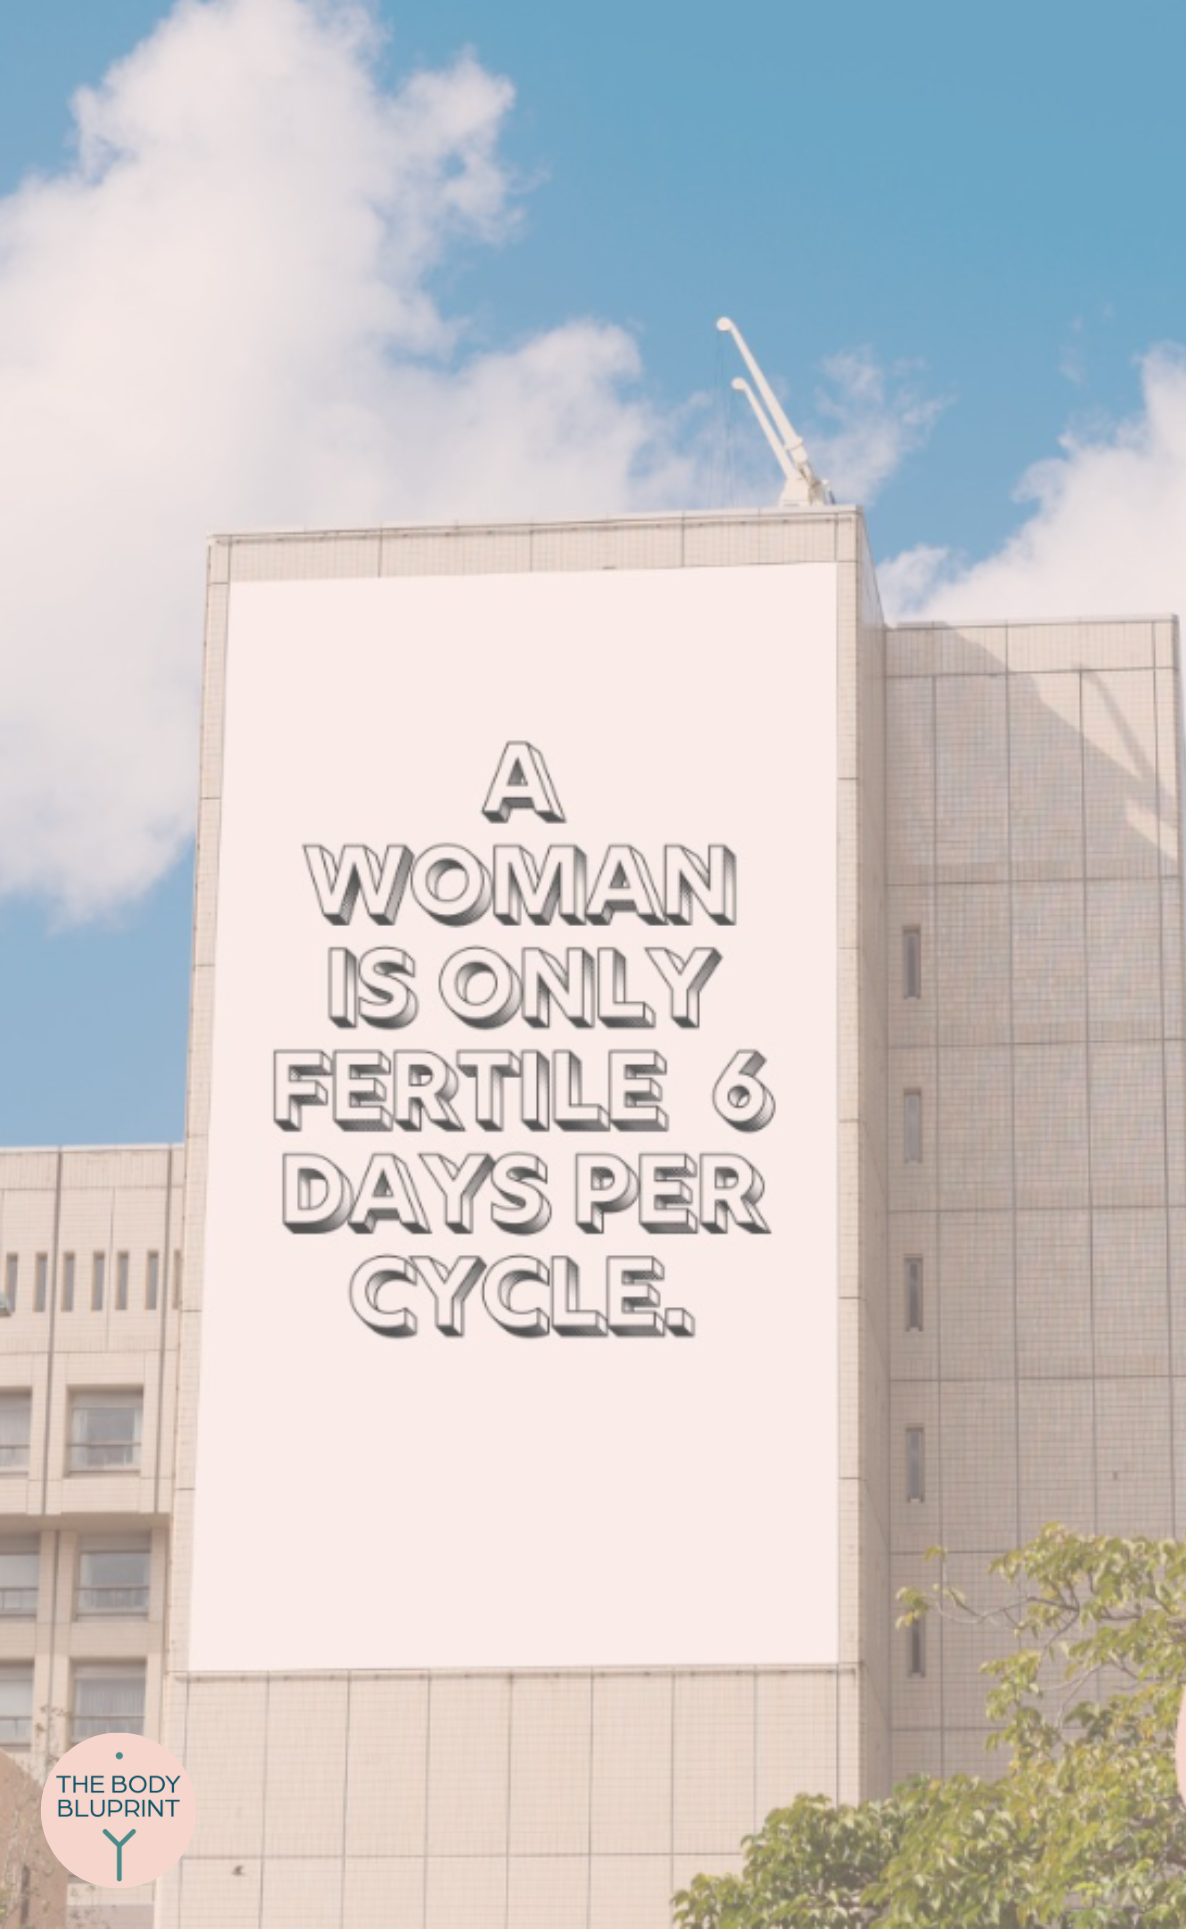 A billboard with the words on it" A woman is only fertile 6 days if her cycle"